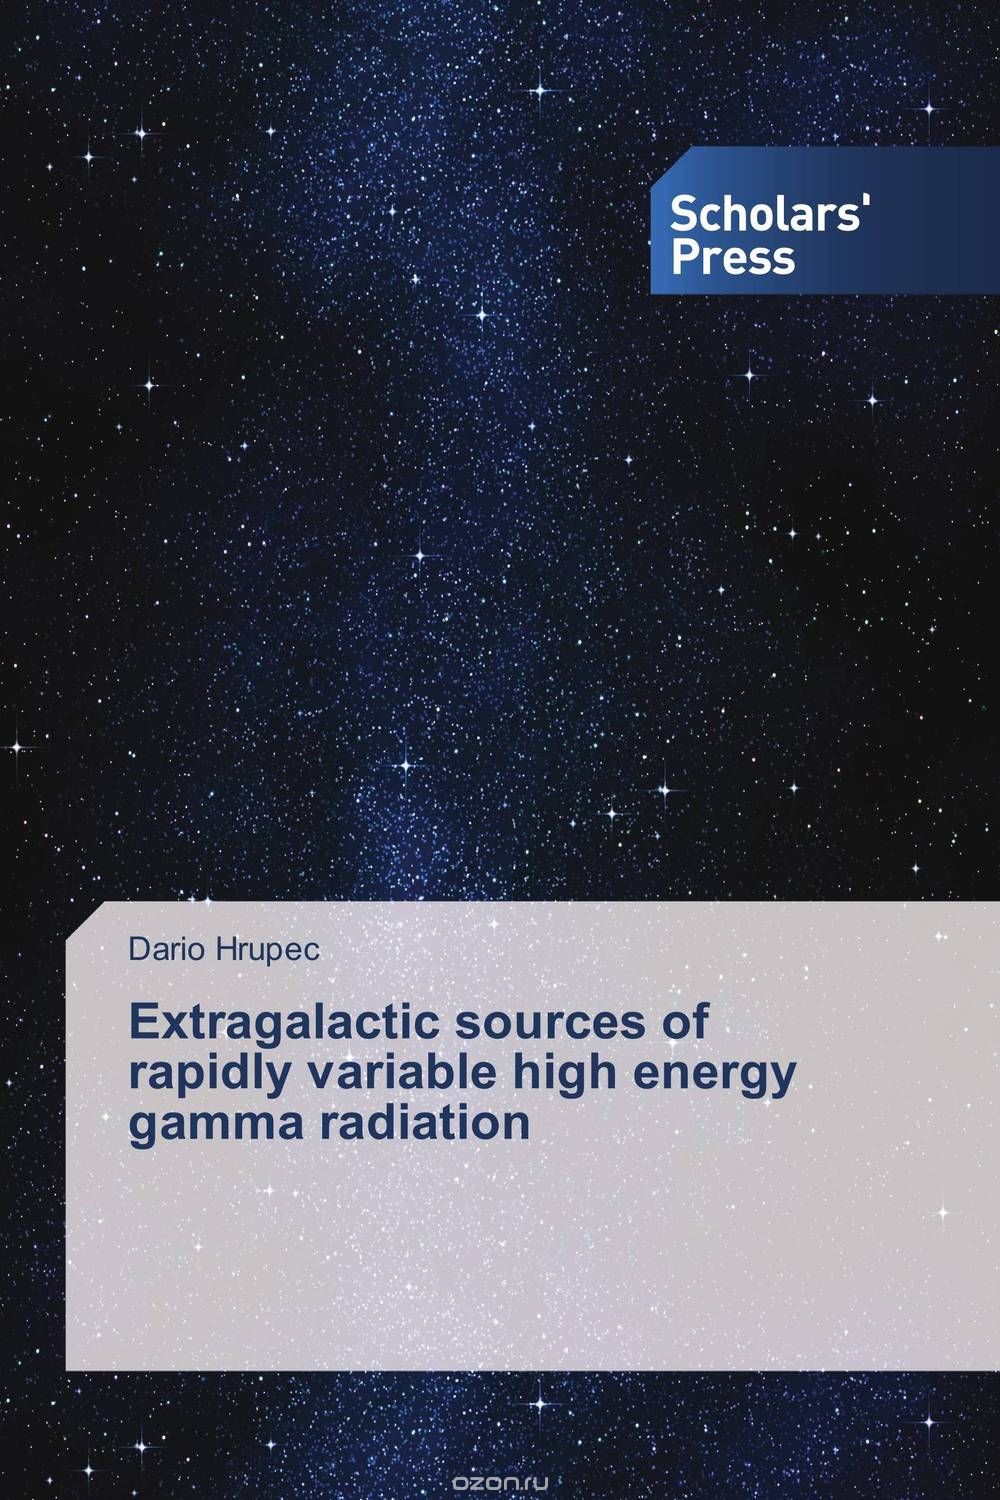 Extragalactic sources of rapidly variable high energy gamma radiation